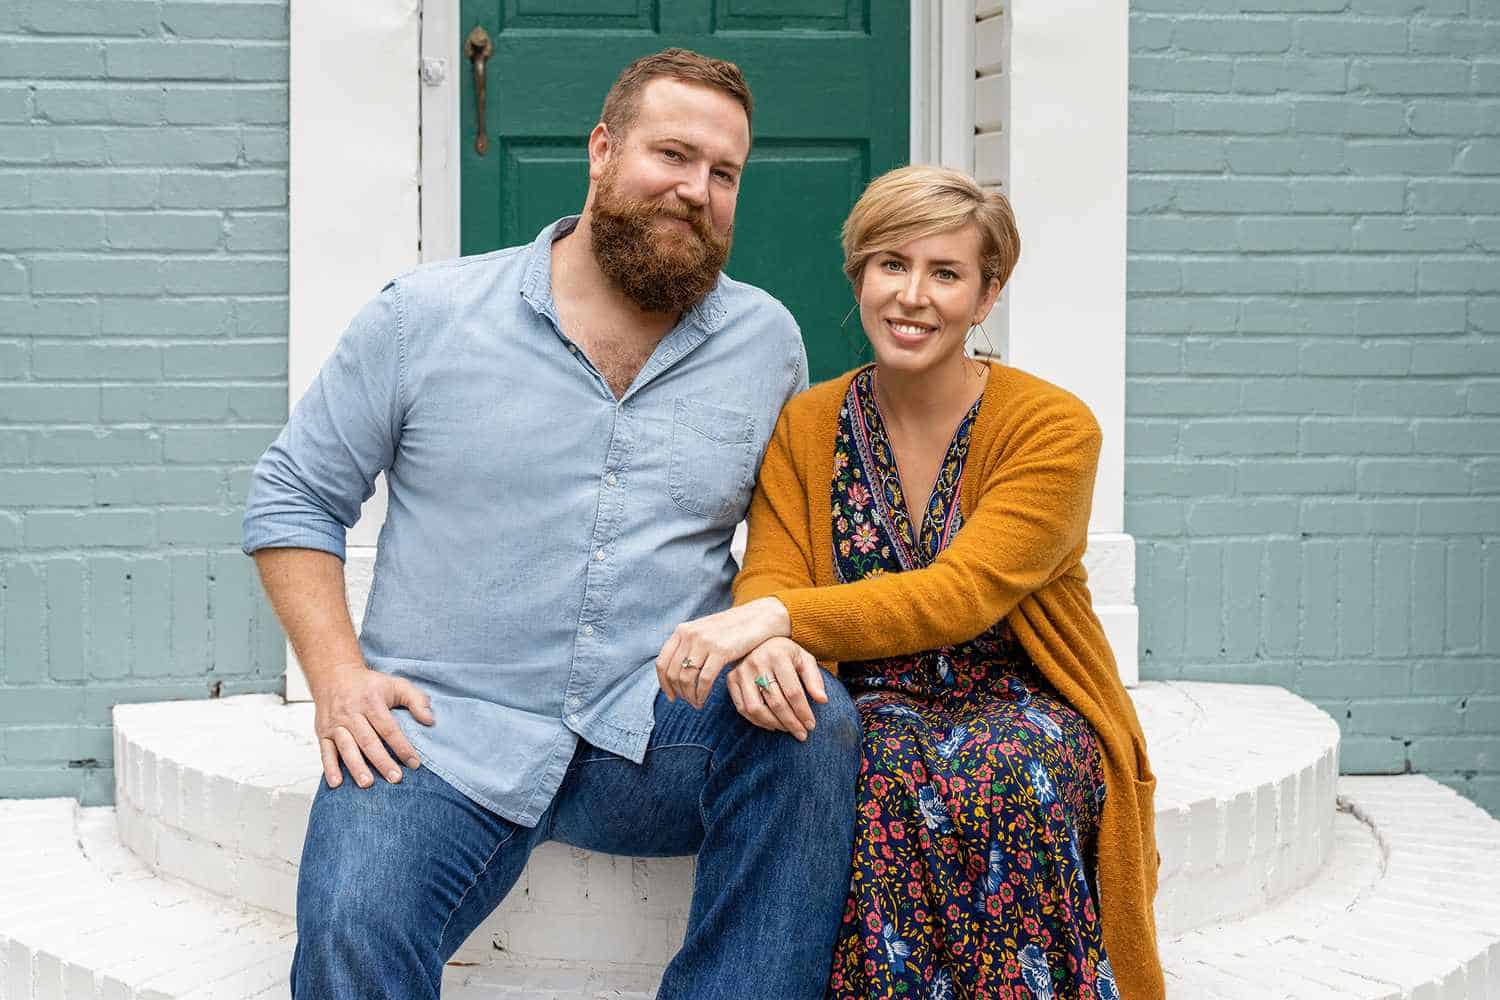 How to Watch Home Town Takeover Season 2 Episodes Live and Online? Streaming Guide